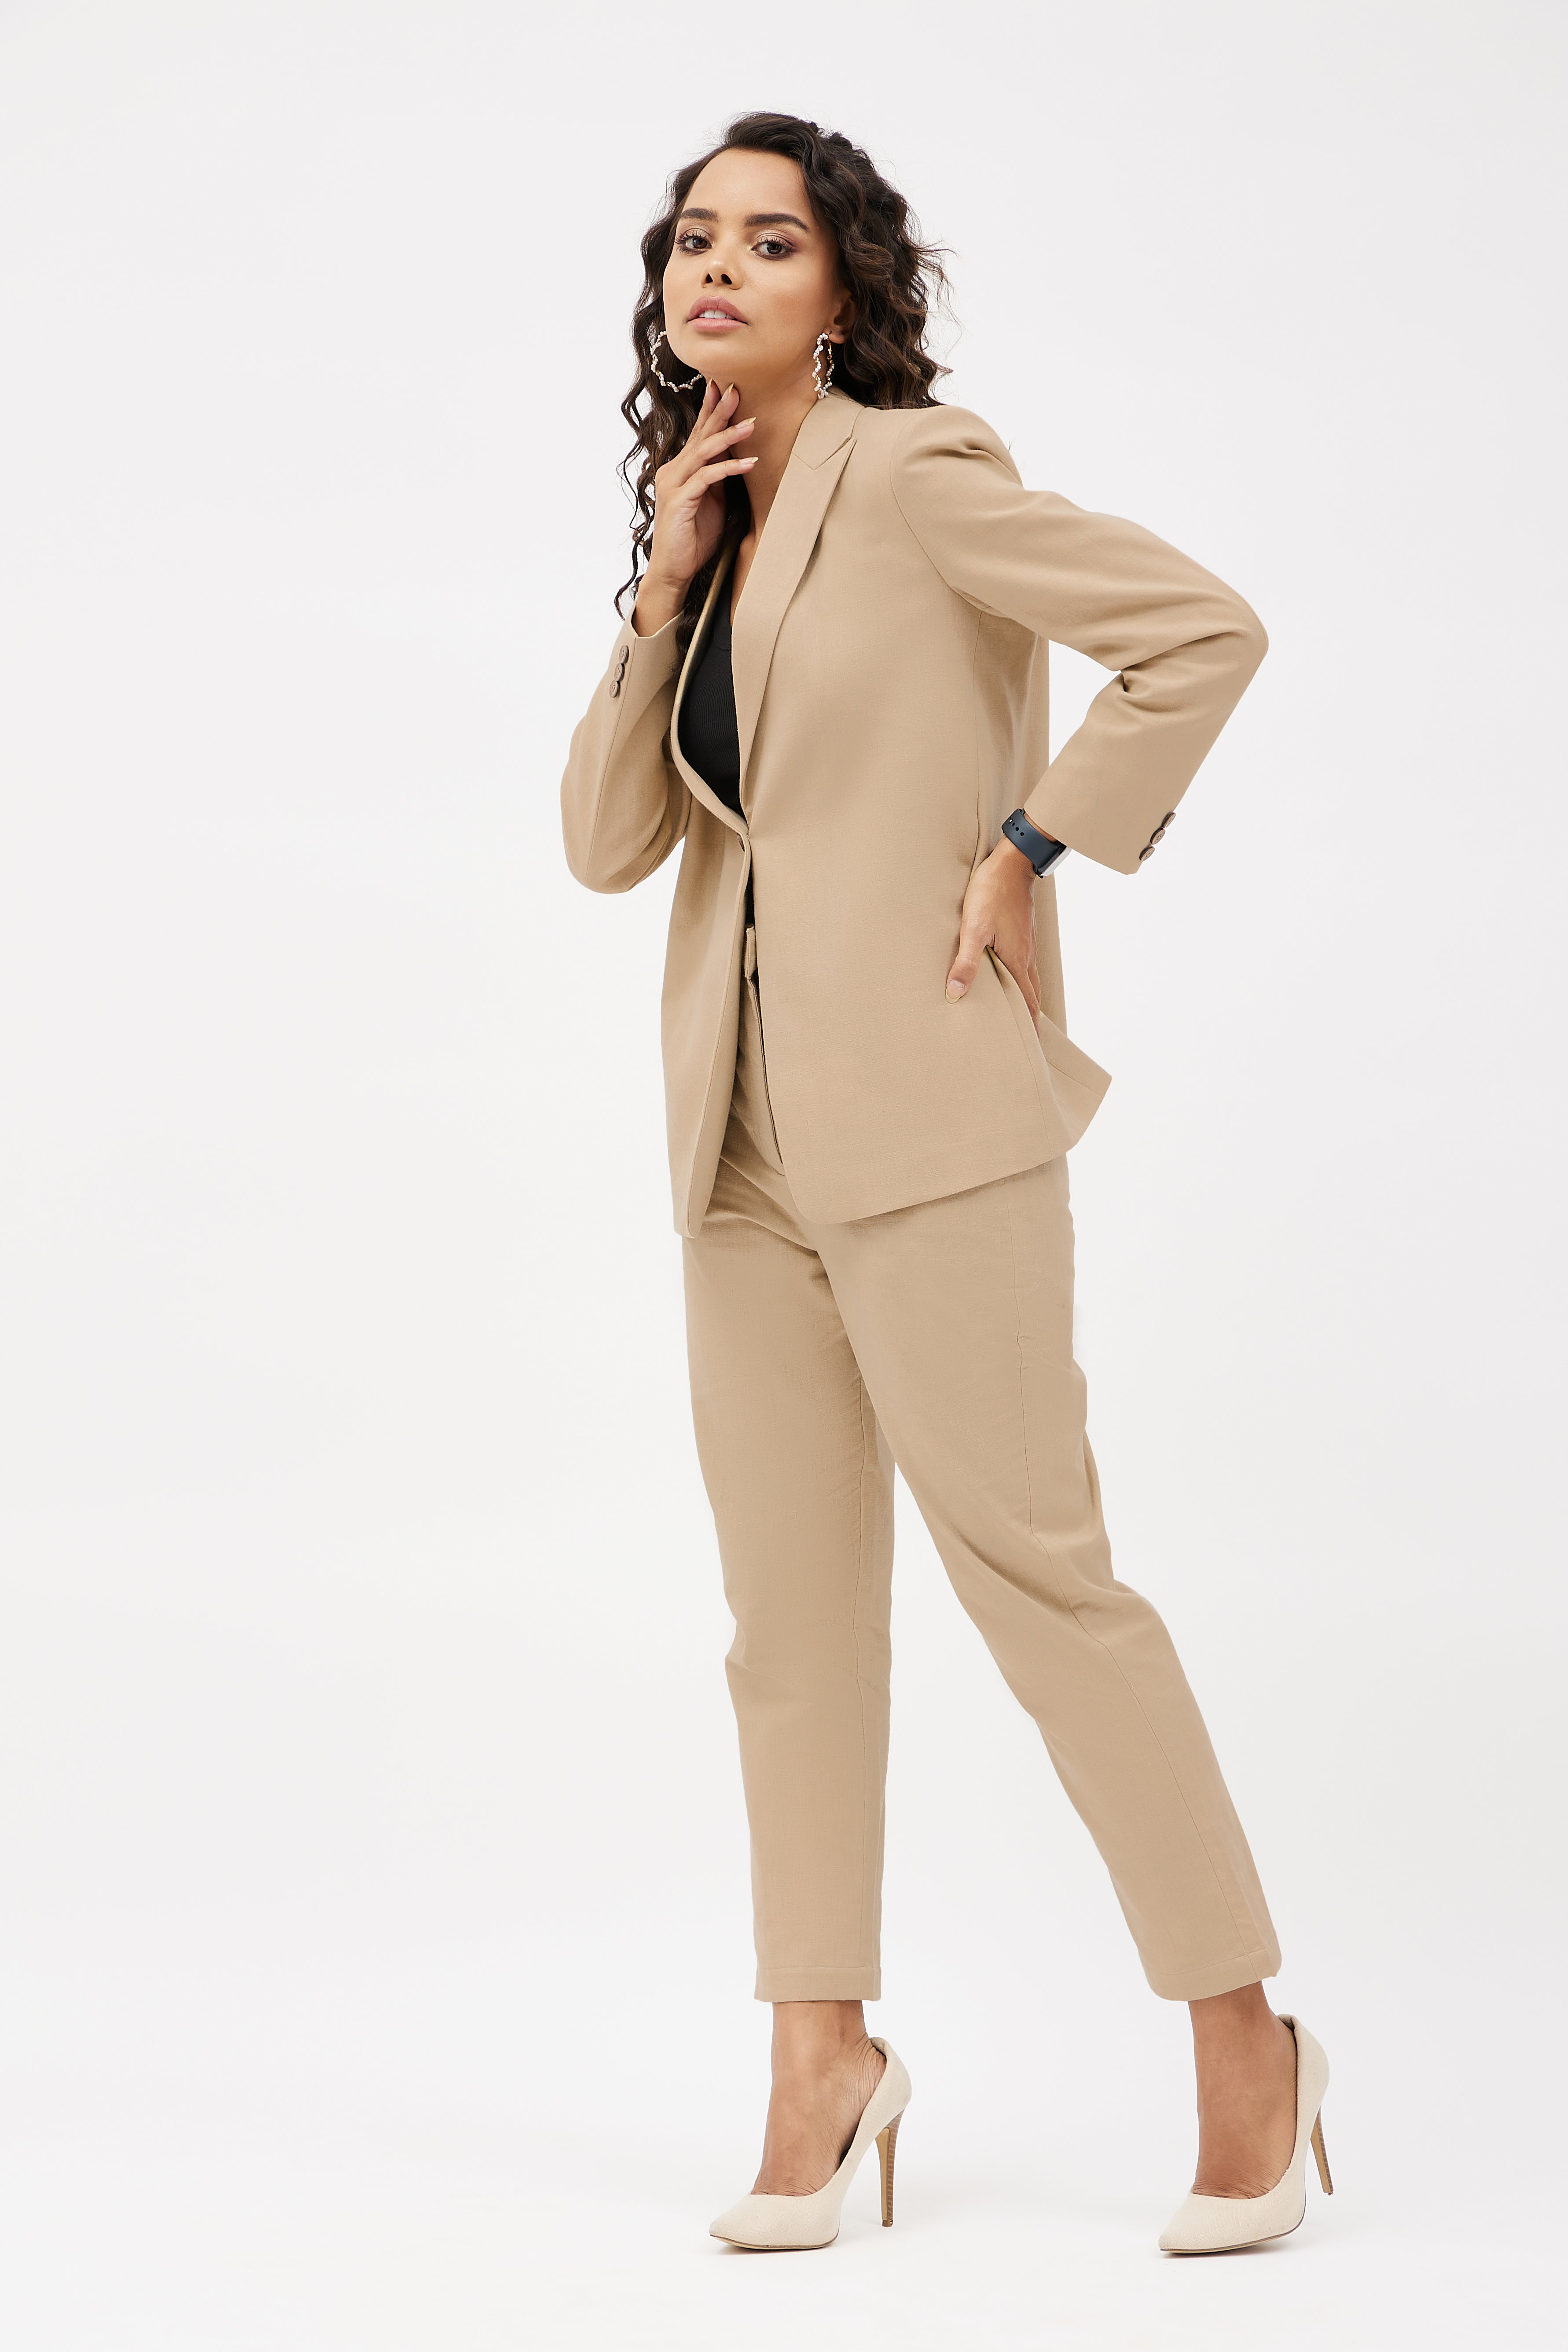 Spring Autumn Office Ladies Suit Beige Elegant Blazer Women Loose  DoubleBreasted Straight Suit Trousers TwoPiece Suit Color  CreamColored  Blazer Size  XL  Amazonca Clothing Shoes  Accessories